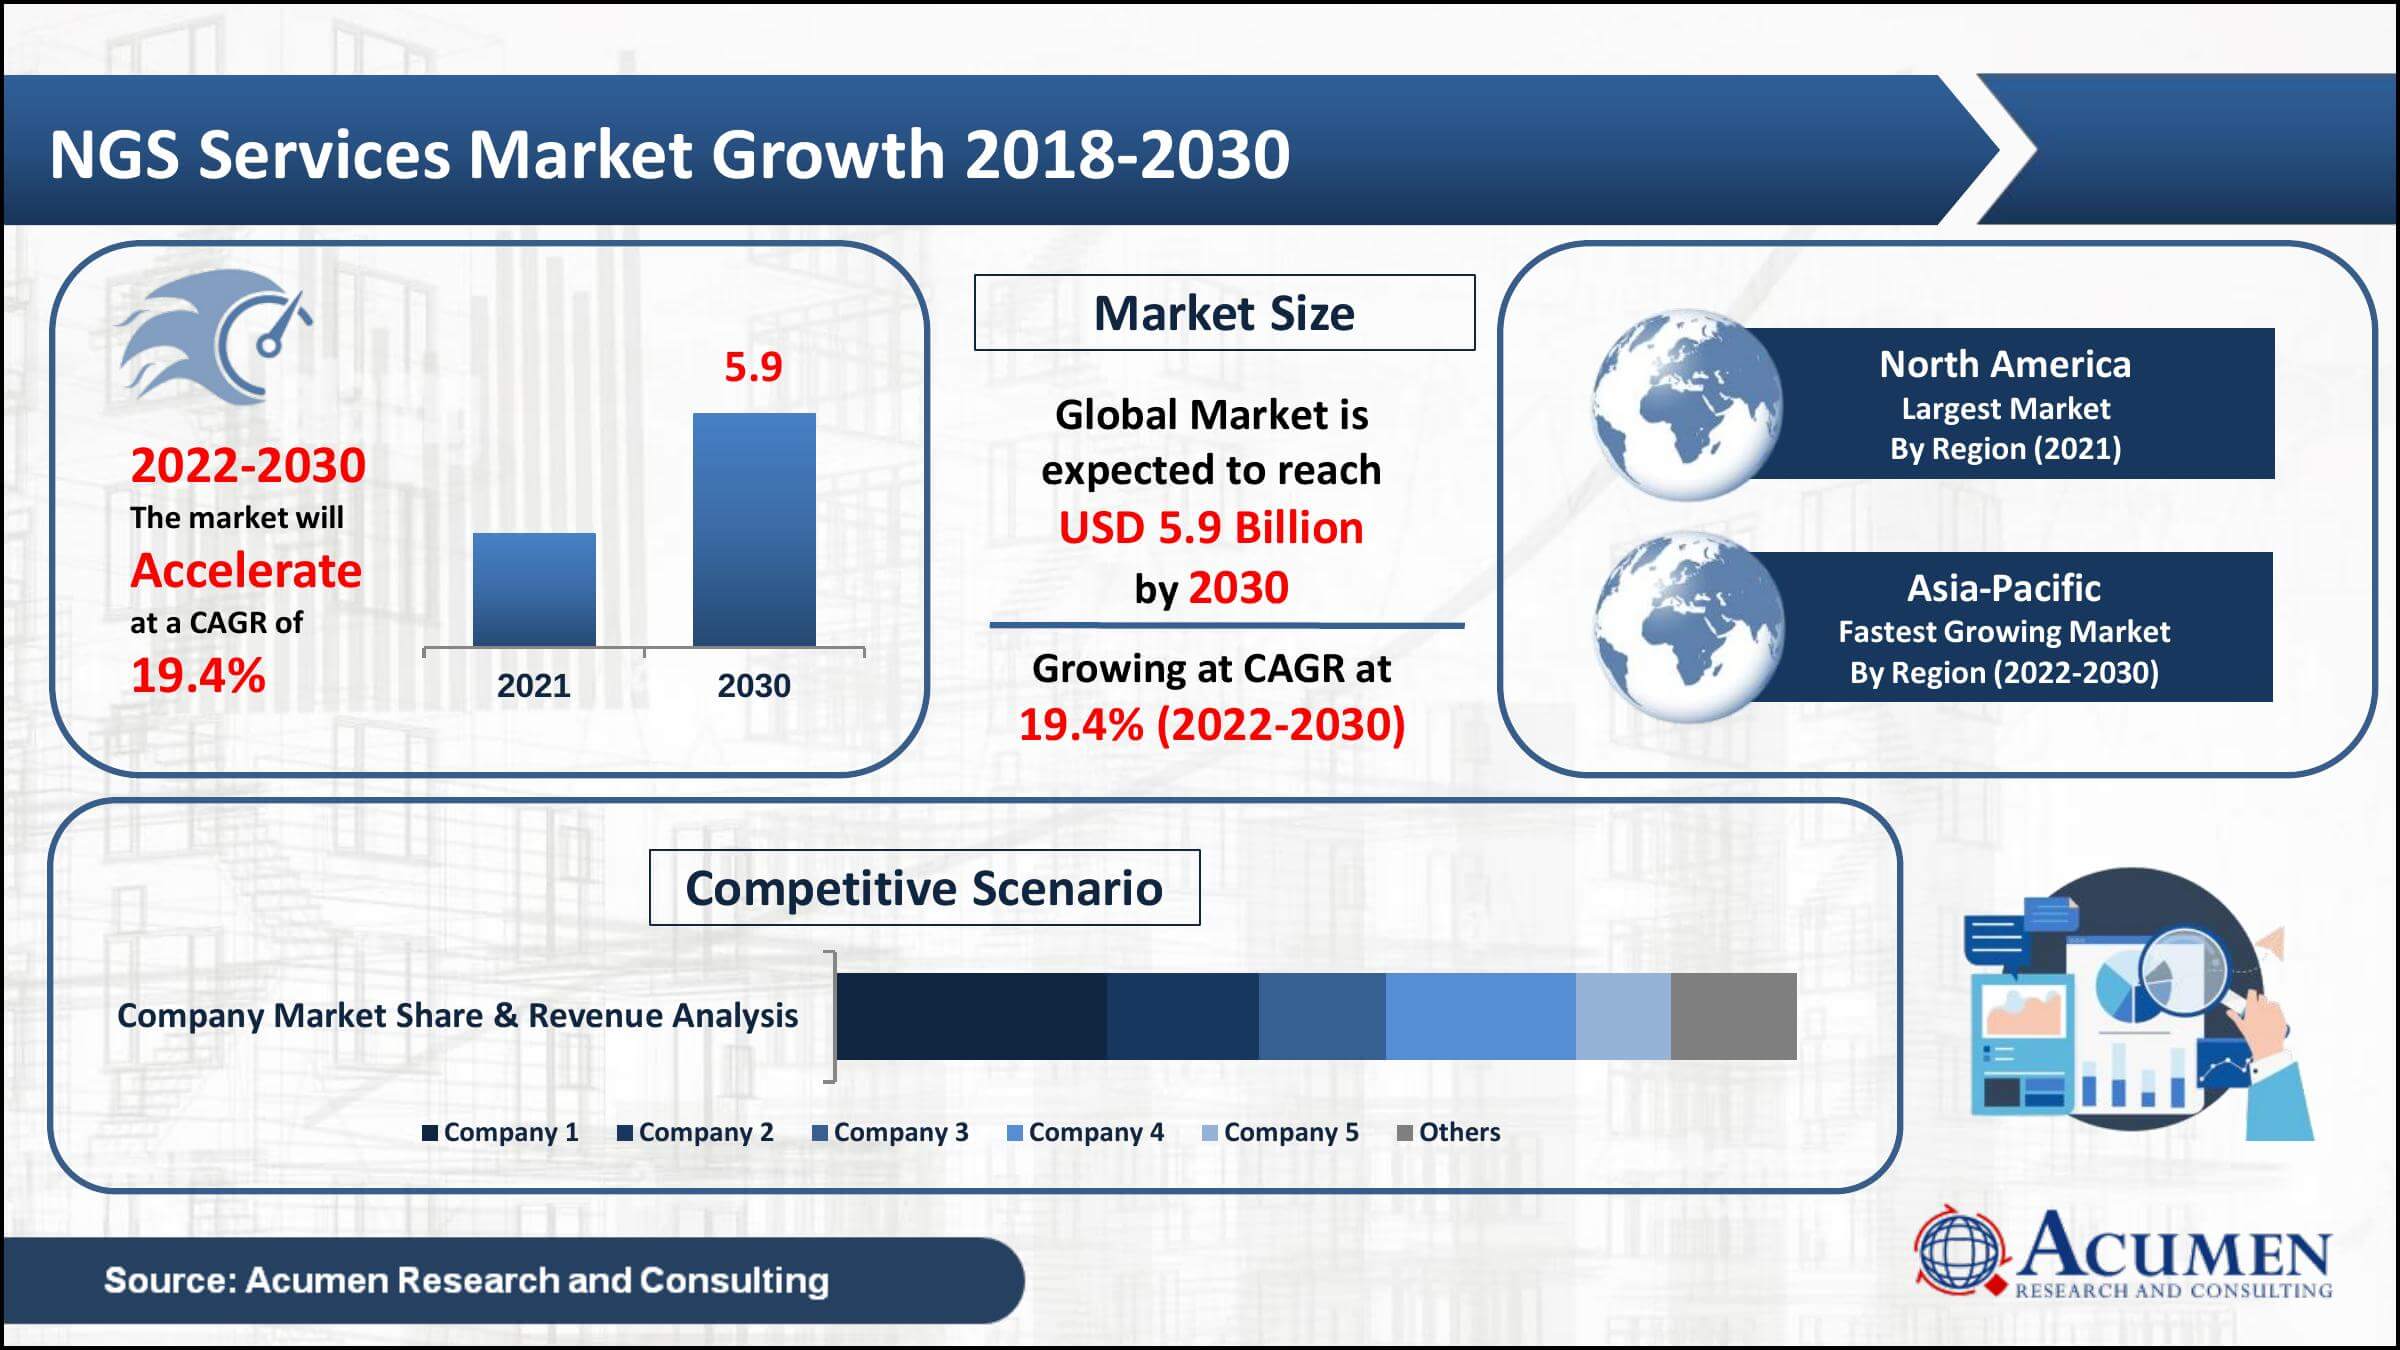 Global NGS services market value was worth USD 1.2 Billion in 2021, with a 19.4% CAGR from 2022 to 2030